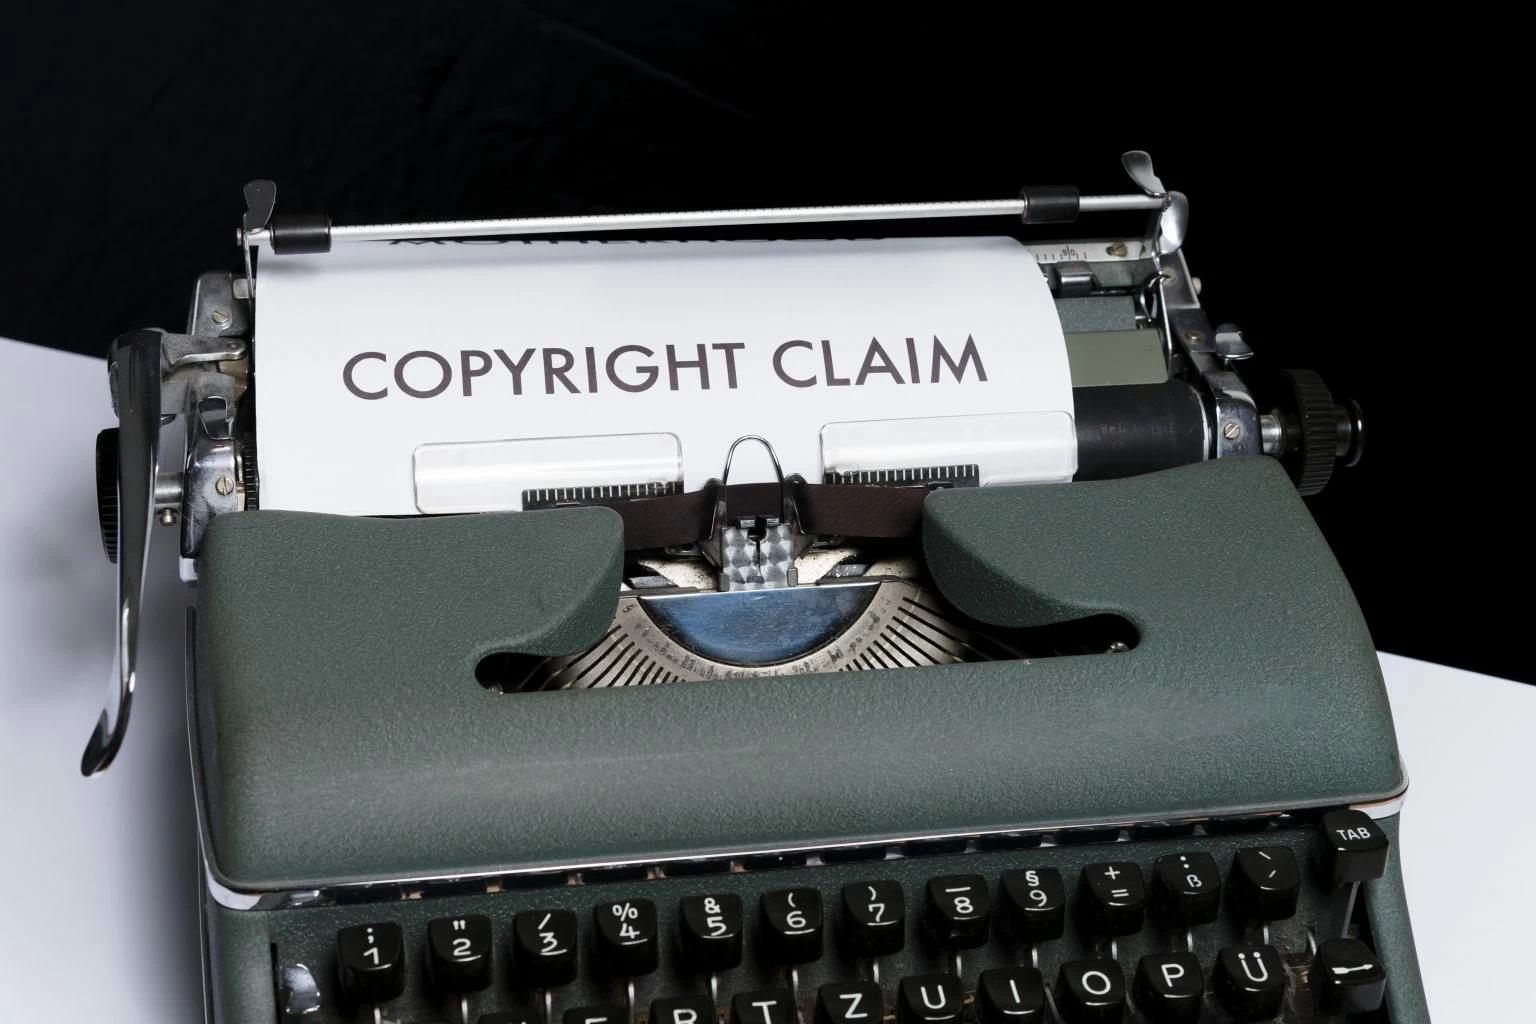 AFP Furor: Copyright Issues in the Spotlight